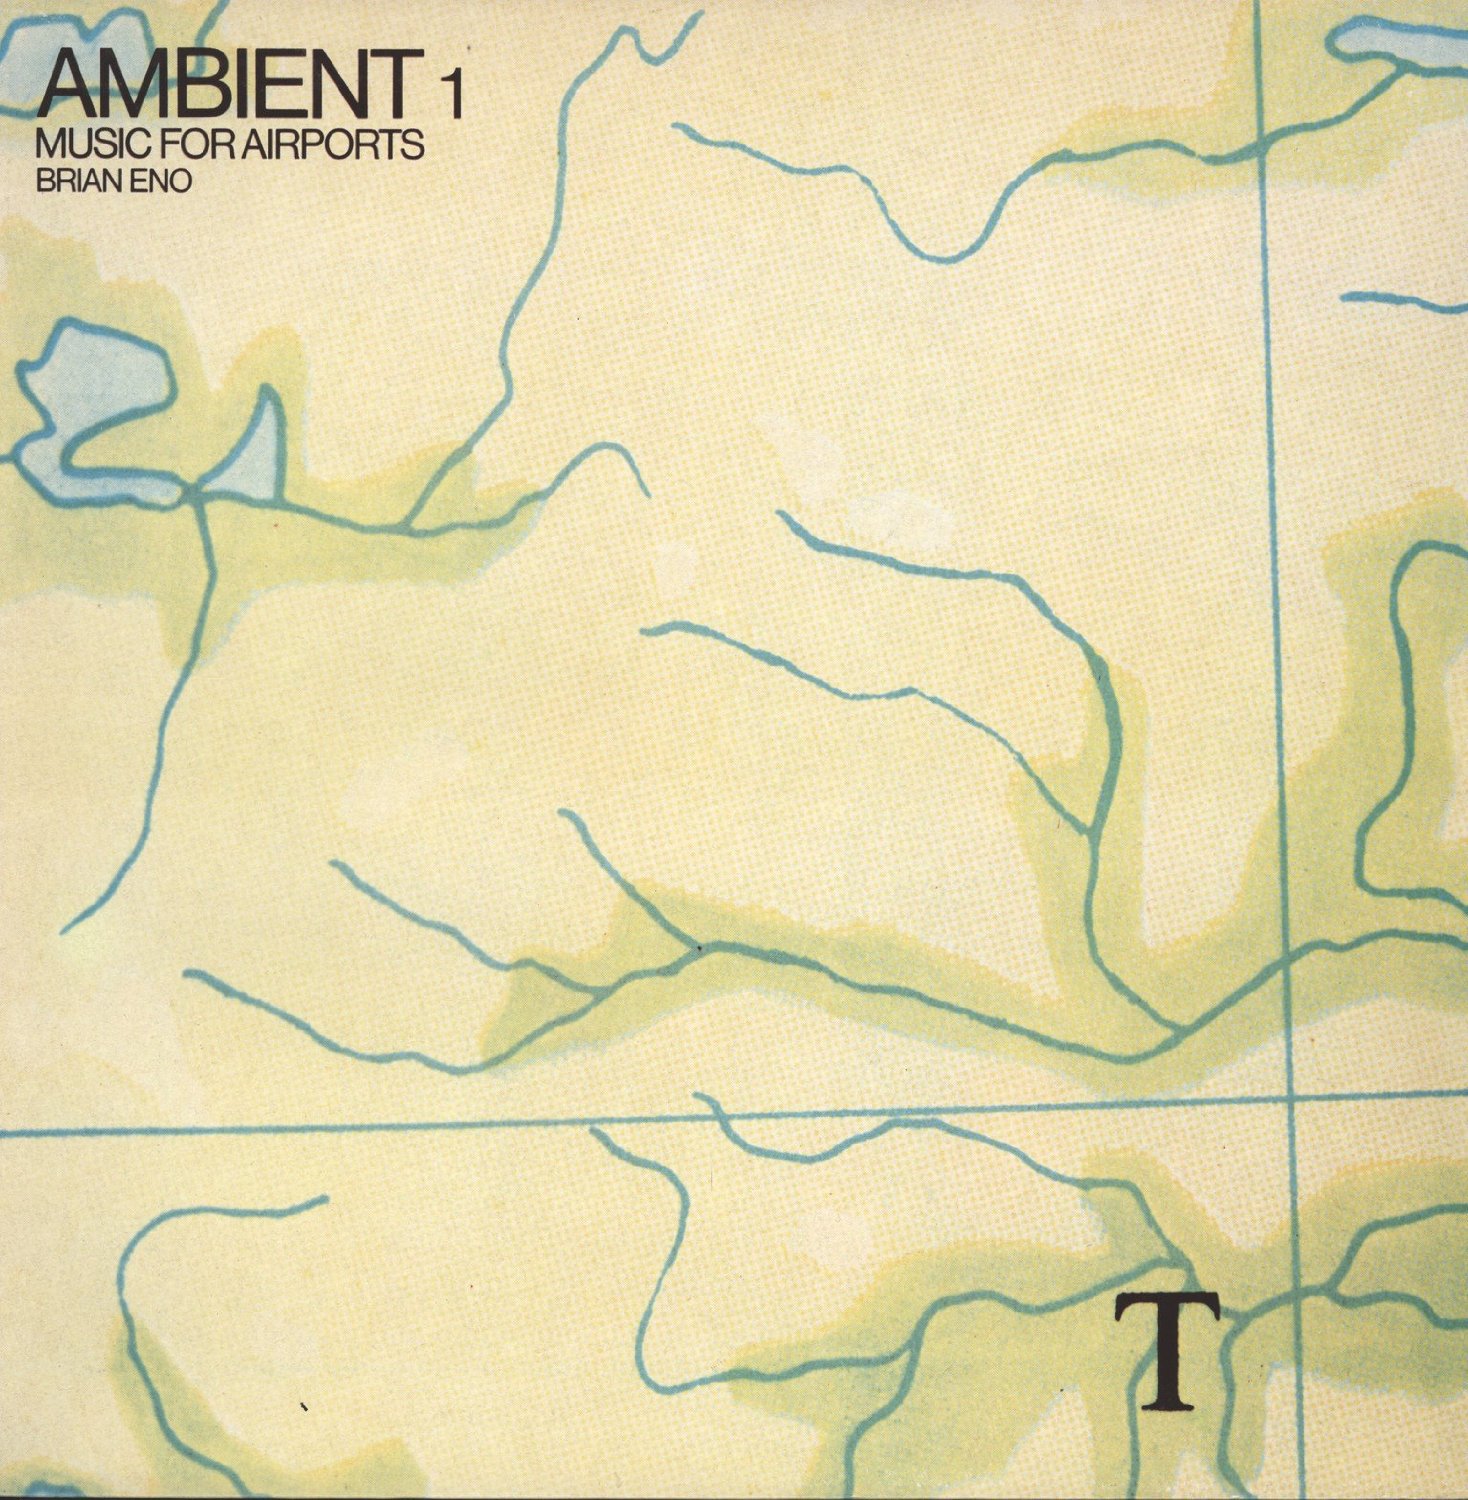 Eno News on "The 50 Best Ambient Albums Of All Time #BrianEno #TerryRiley #LaurieSpiegel #AphexTwin #AliceColtrane #audio #stream https://t.co/geIJhqSqez https://t.co/bgBeugAVXl" / Twitter